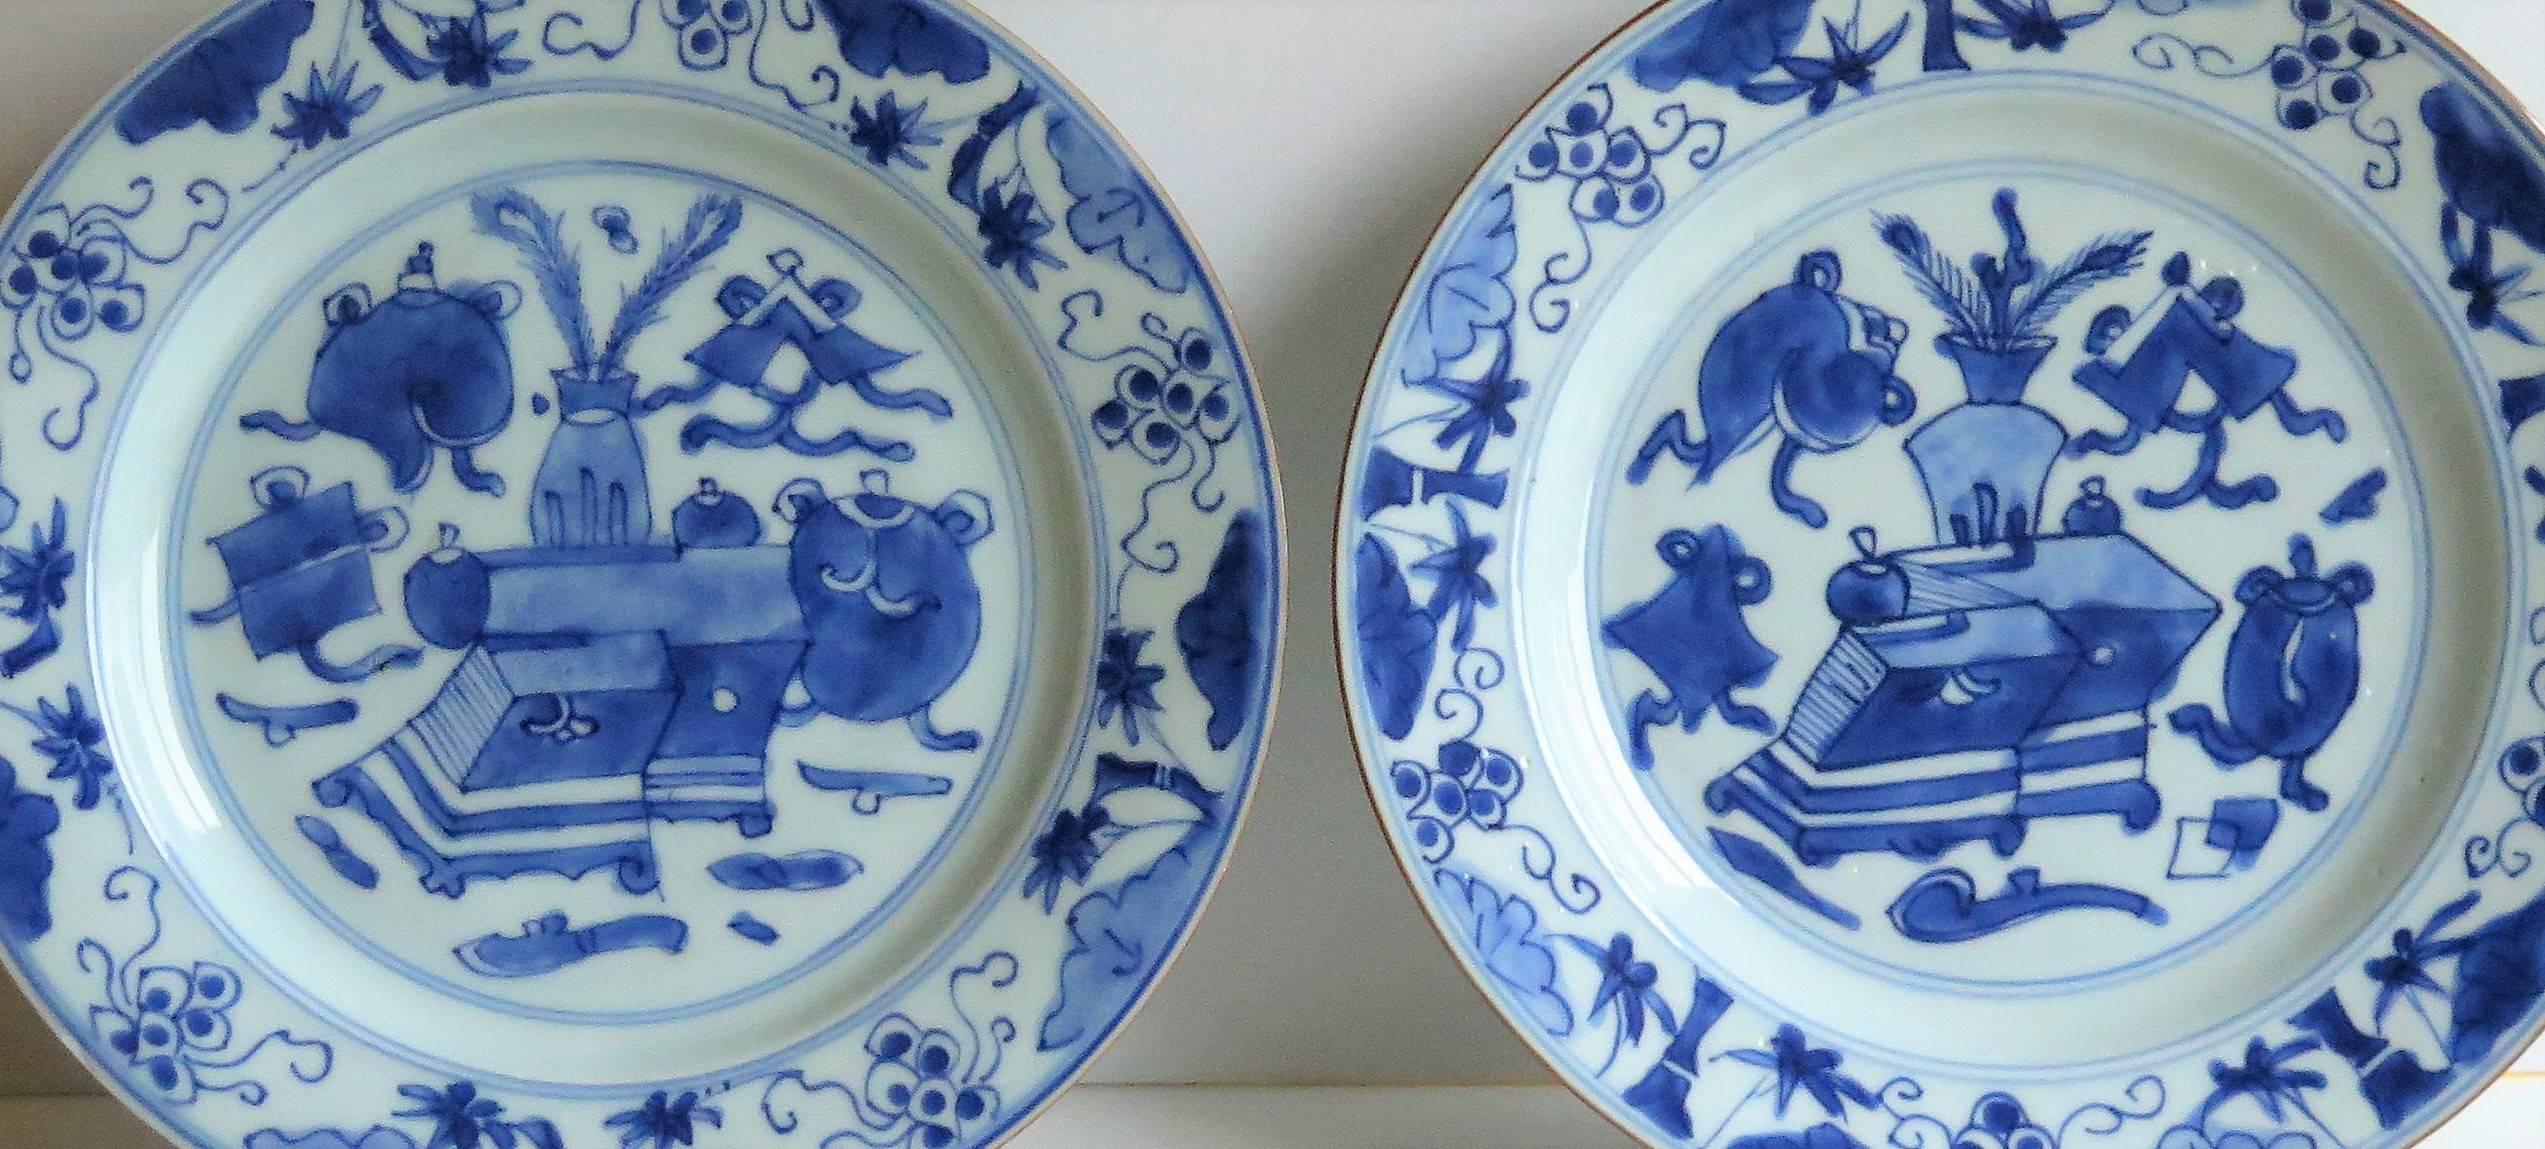 Fine Pair of Chinese Porcelain Plates Blue and White, 18th Century Qing Ca 1735 2